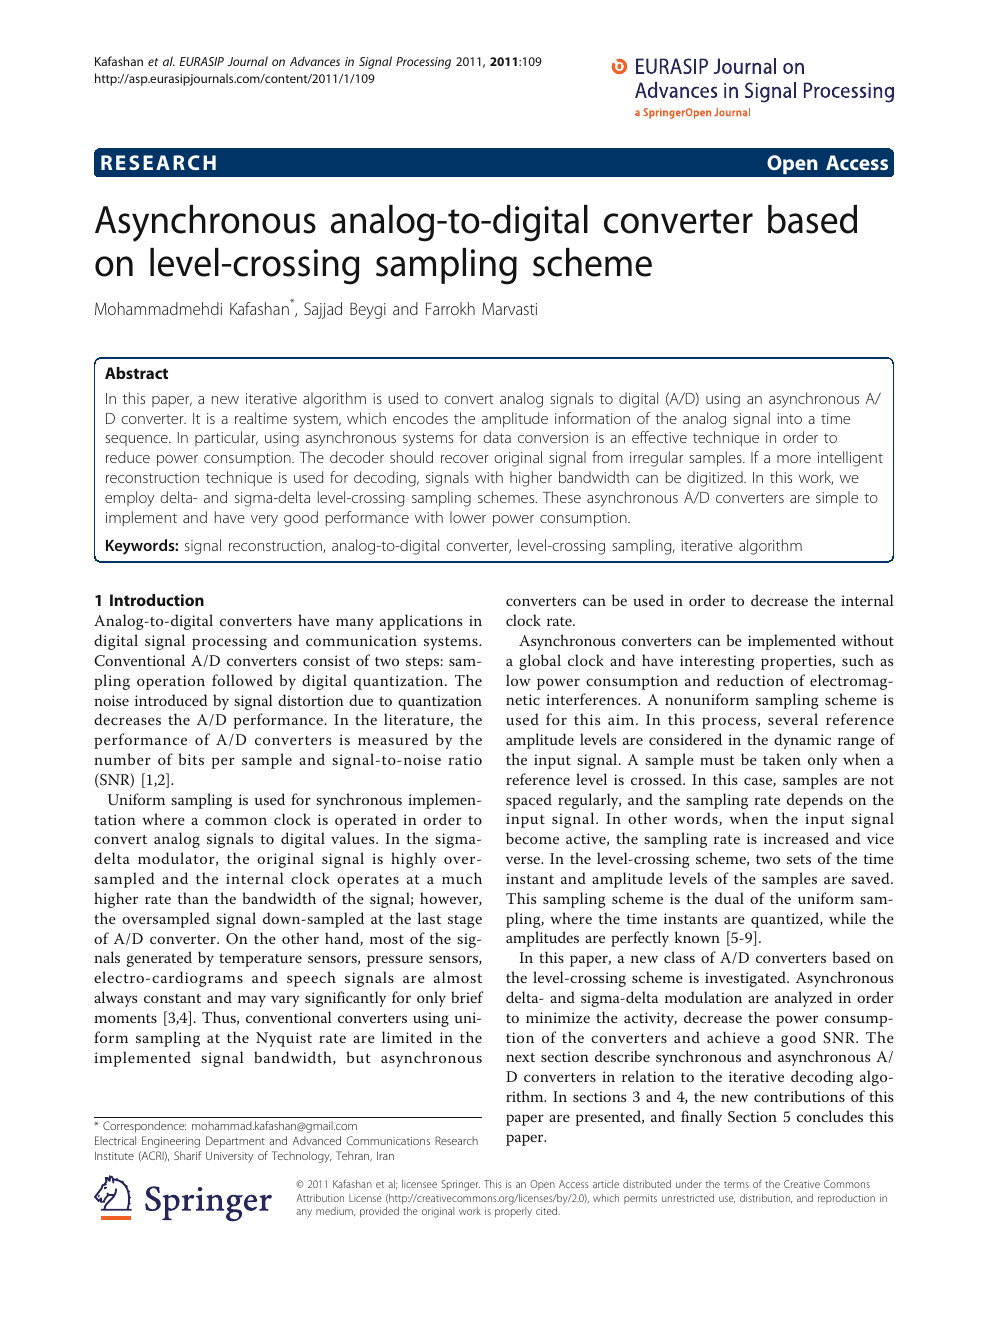 Asynchronous Analog To Digital Converter Based On Level Crossing Sampling Scheme Topic Of Research Paper In Medical Engineering Download Scholarly Article Pdf And Read For Free On Cyberleninka Open Science Hub